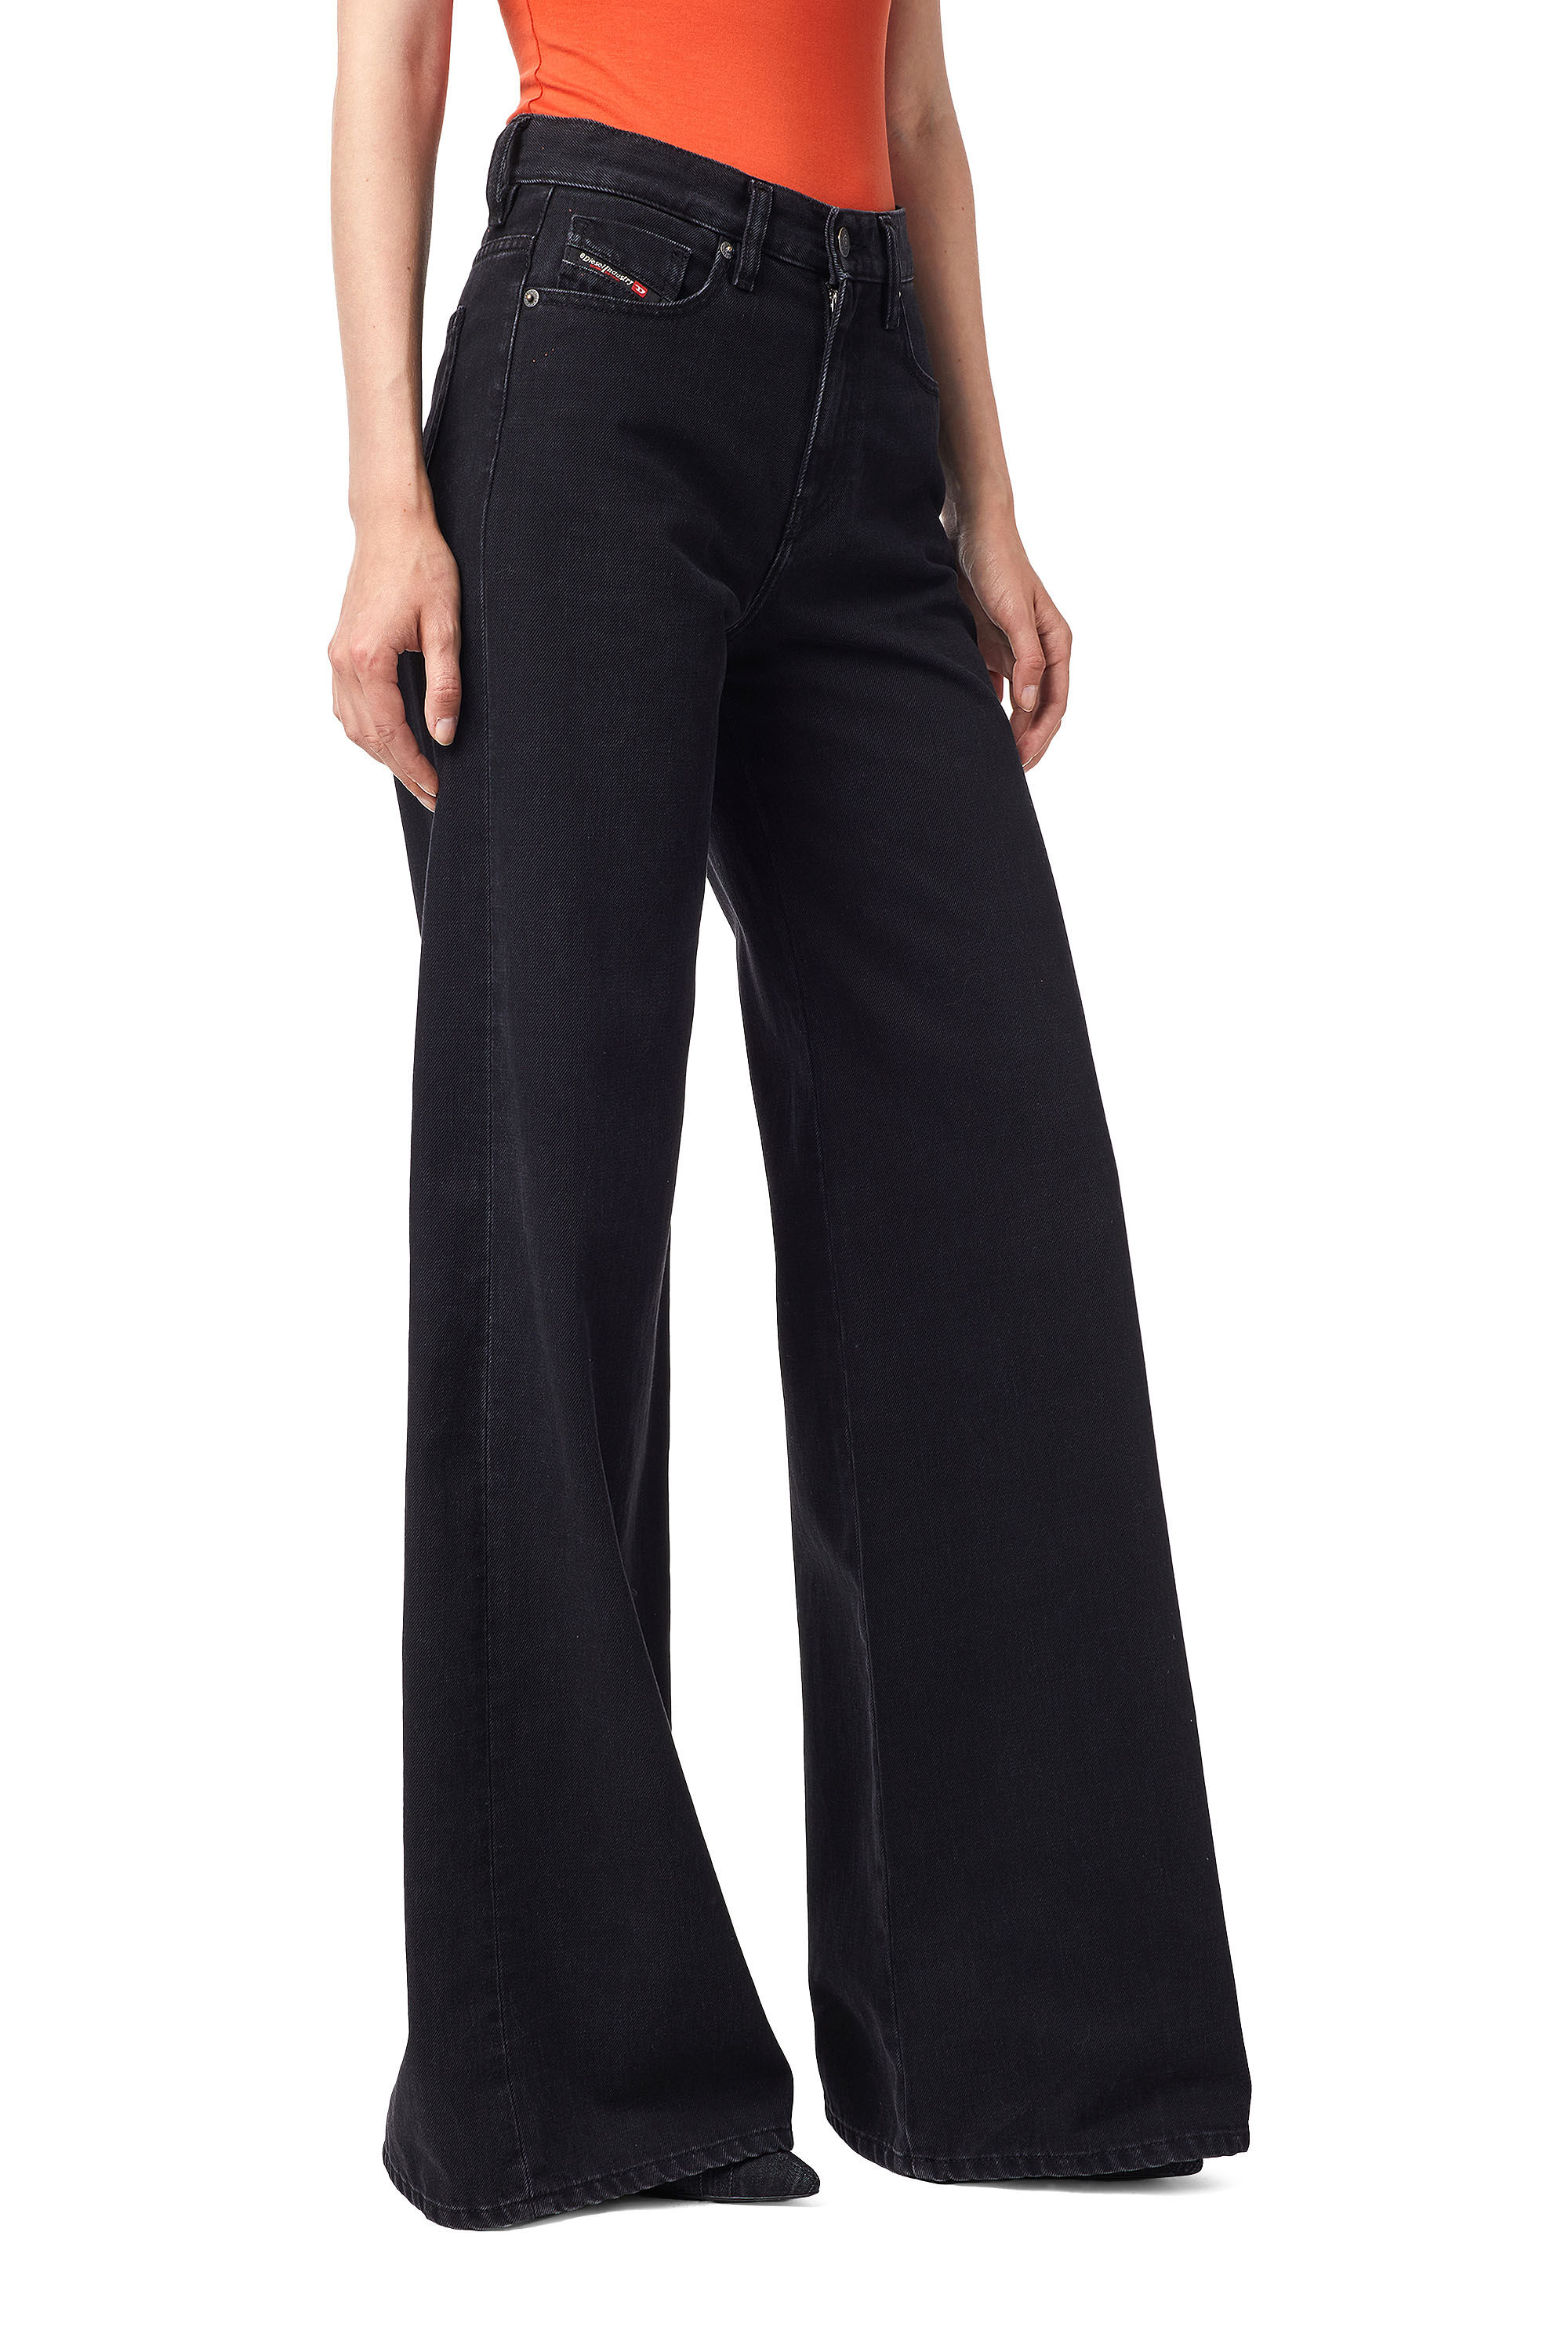 Diesel - D-Akemi Z09RL Bootcut and Flare Jeans,  - Image 8